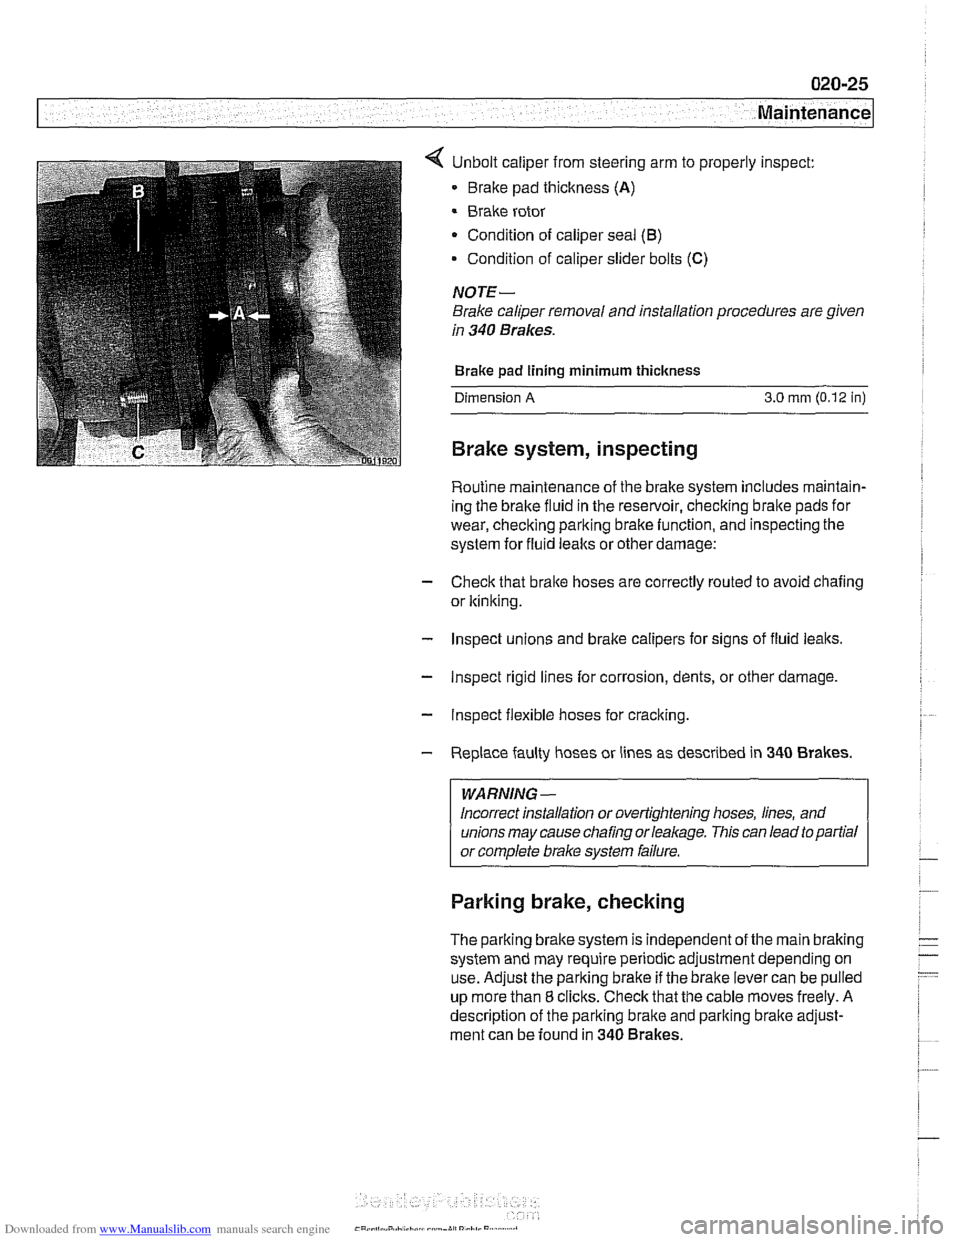 BMW 525i 2000 E39 Workshop Manual Downloaded from www.Manualslib.com manuals search engine 
7 Maintenance 
< Unbolt caliper from steering arm  to properly  inspect: 
Brake  pad thickness 
(A) 
Brake rotor 
Condition  of caliper seal 
